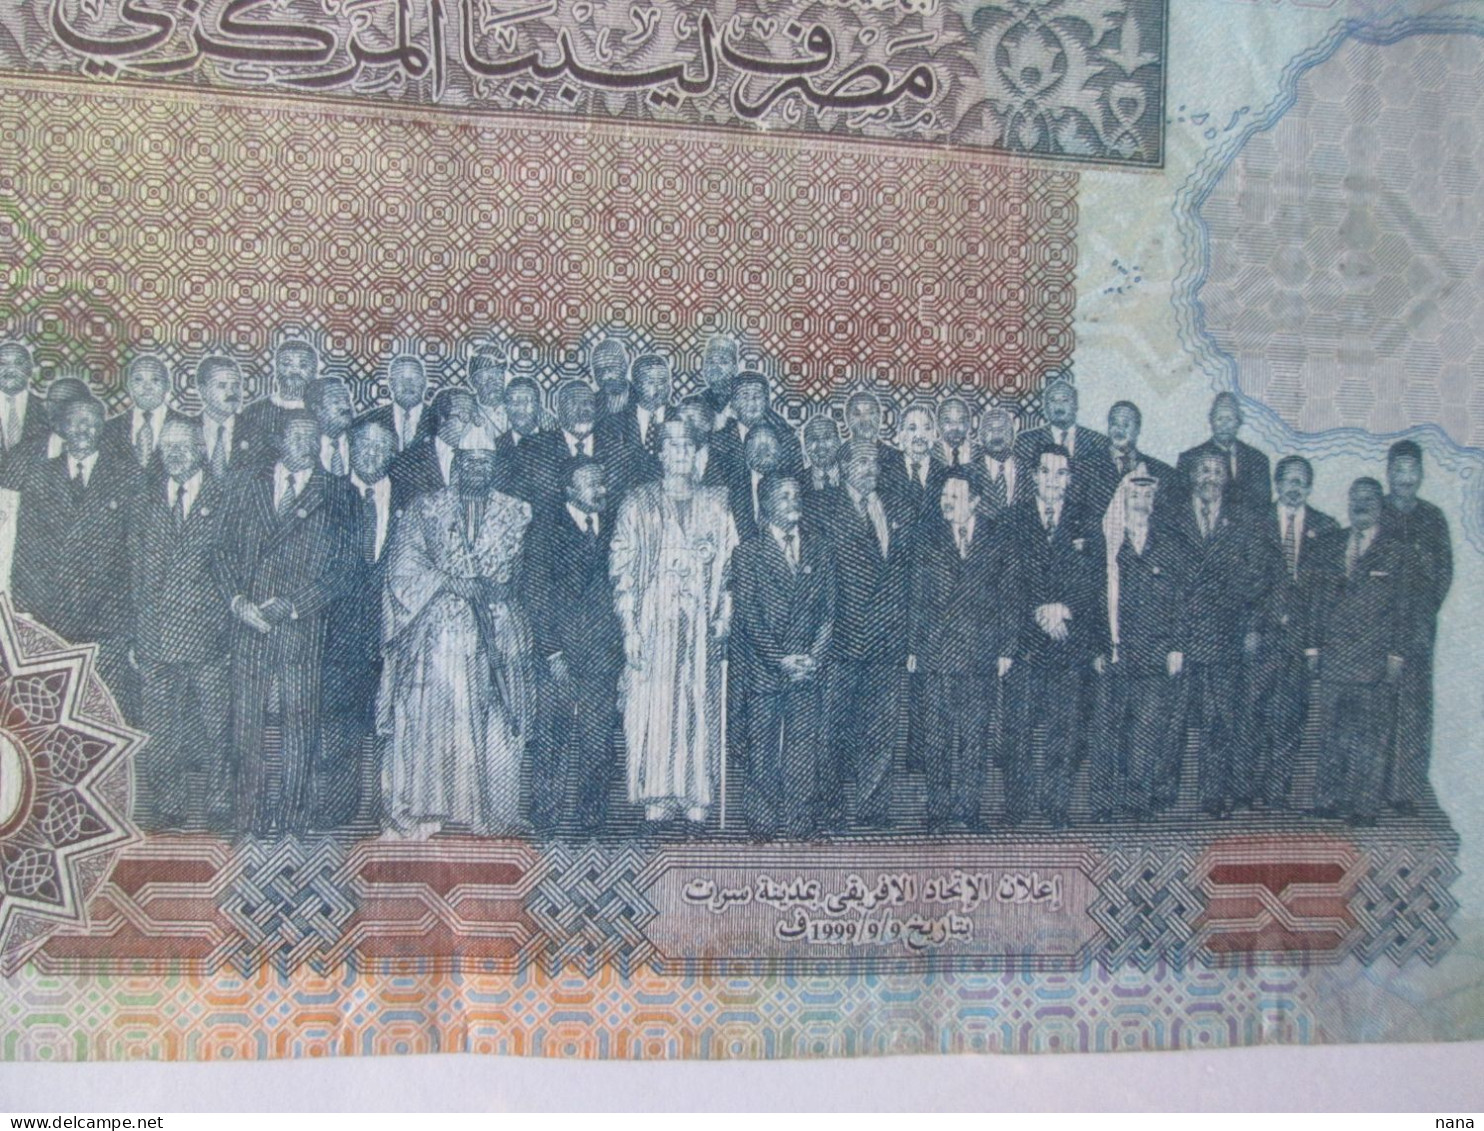 Libya 20 Dinars 2002 Banknote The Greatest African Dictators Of The 20th Century.Les Plus Grands Dictateurs Africains - Libye